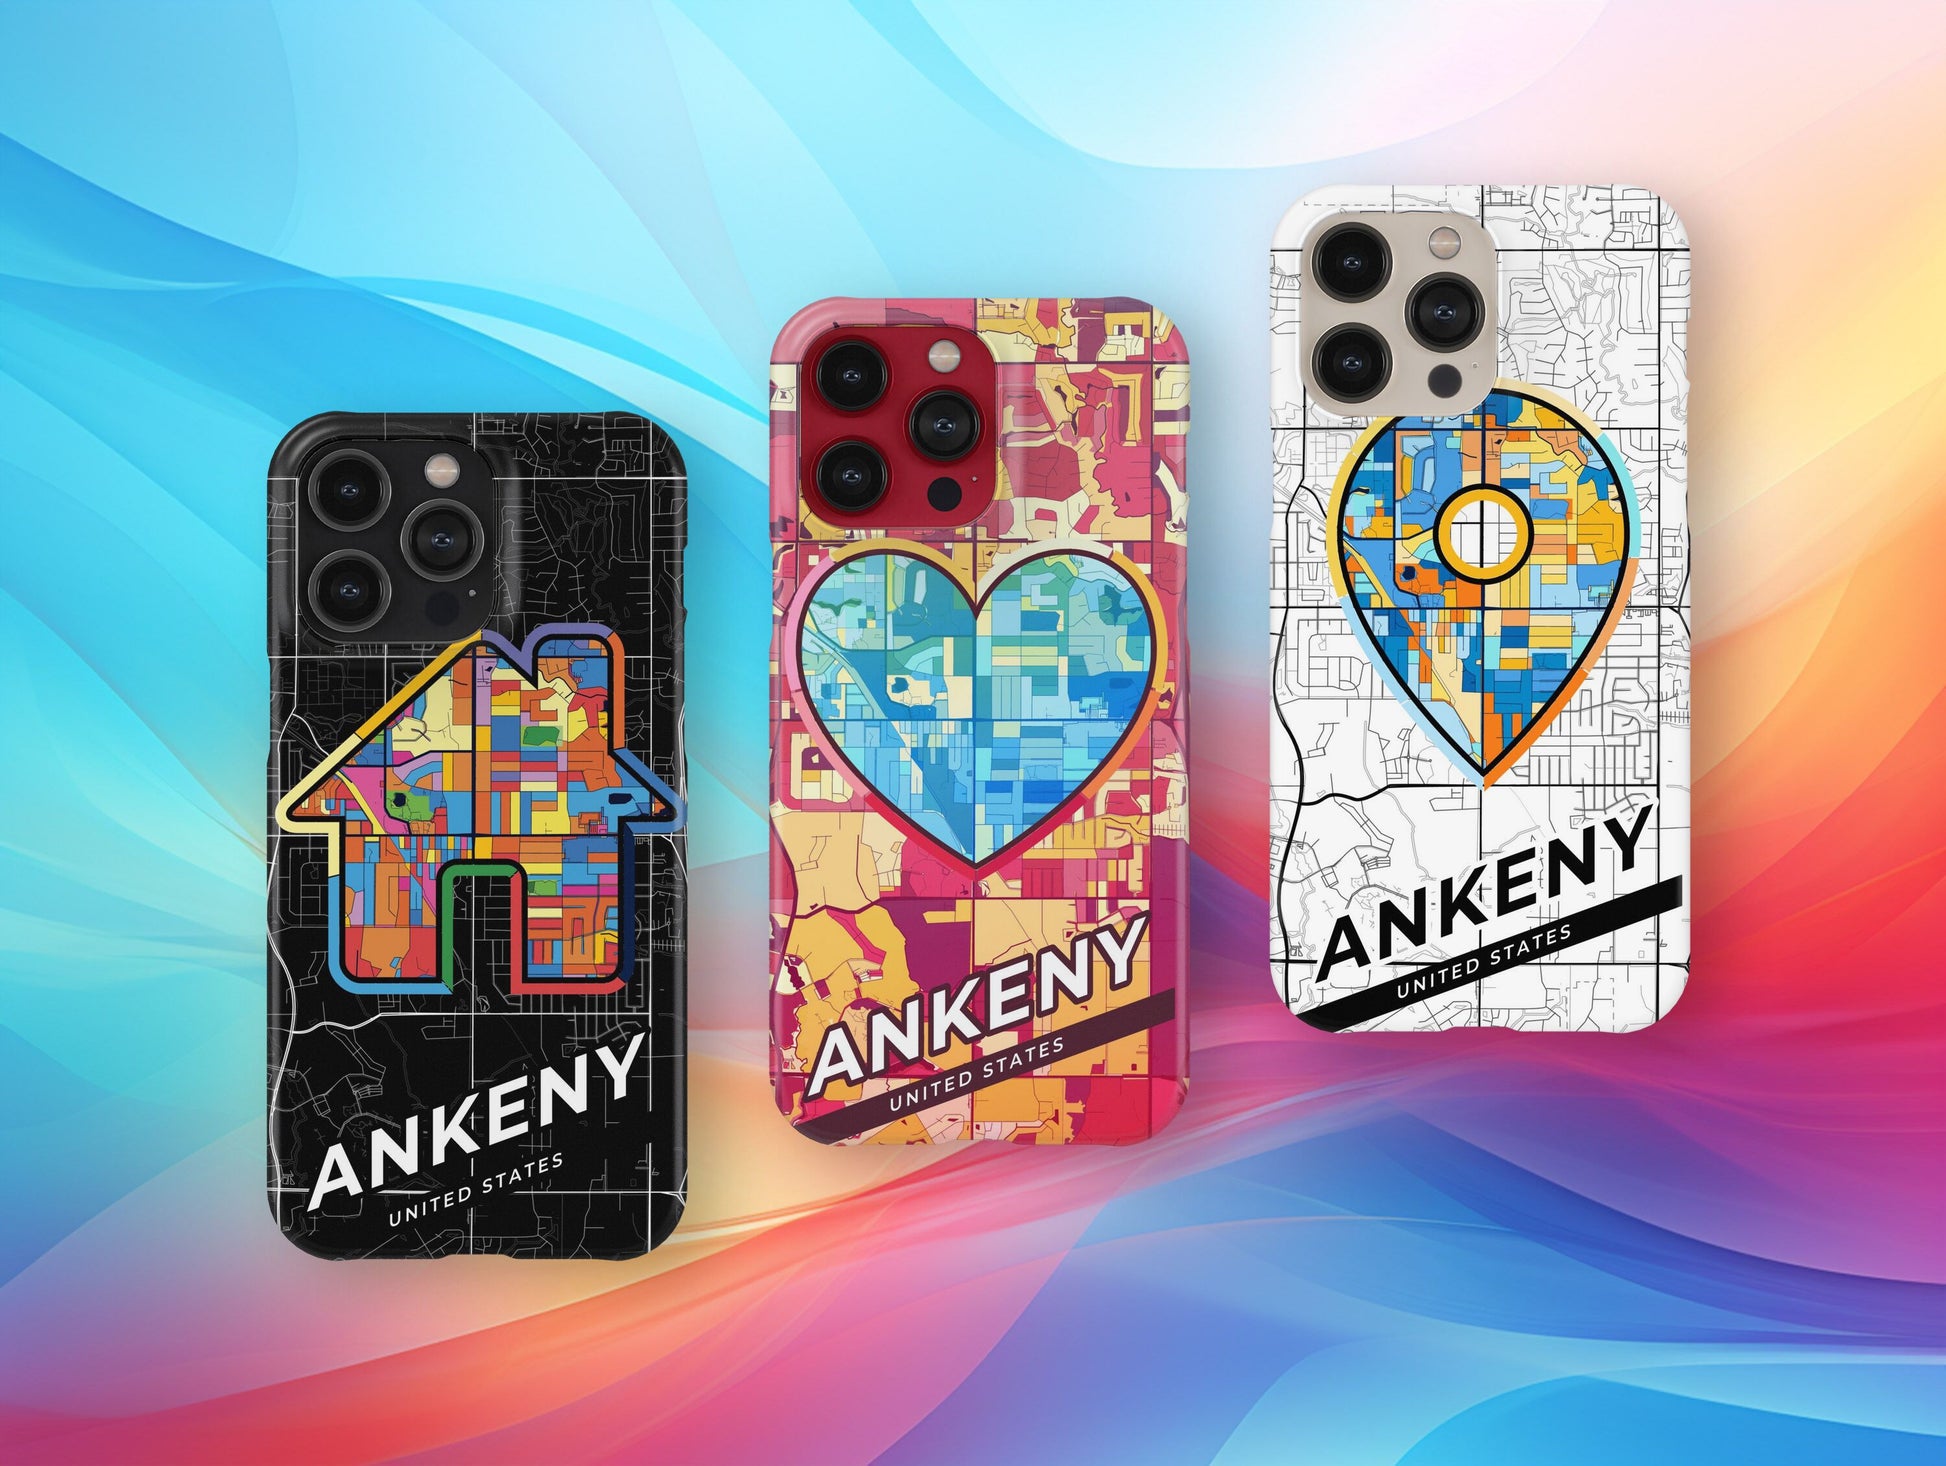 Ankeny Iowa slim phone case with colorful icon. Birthday, wedding or housewarming gift. Couple match cases.